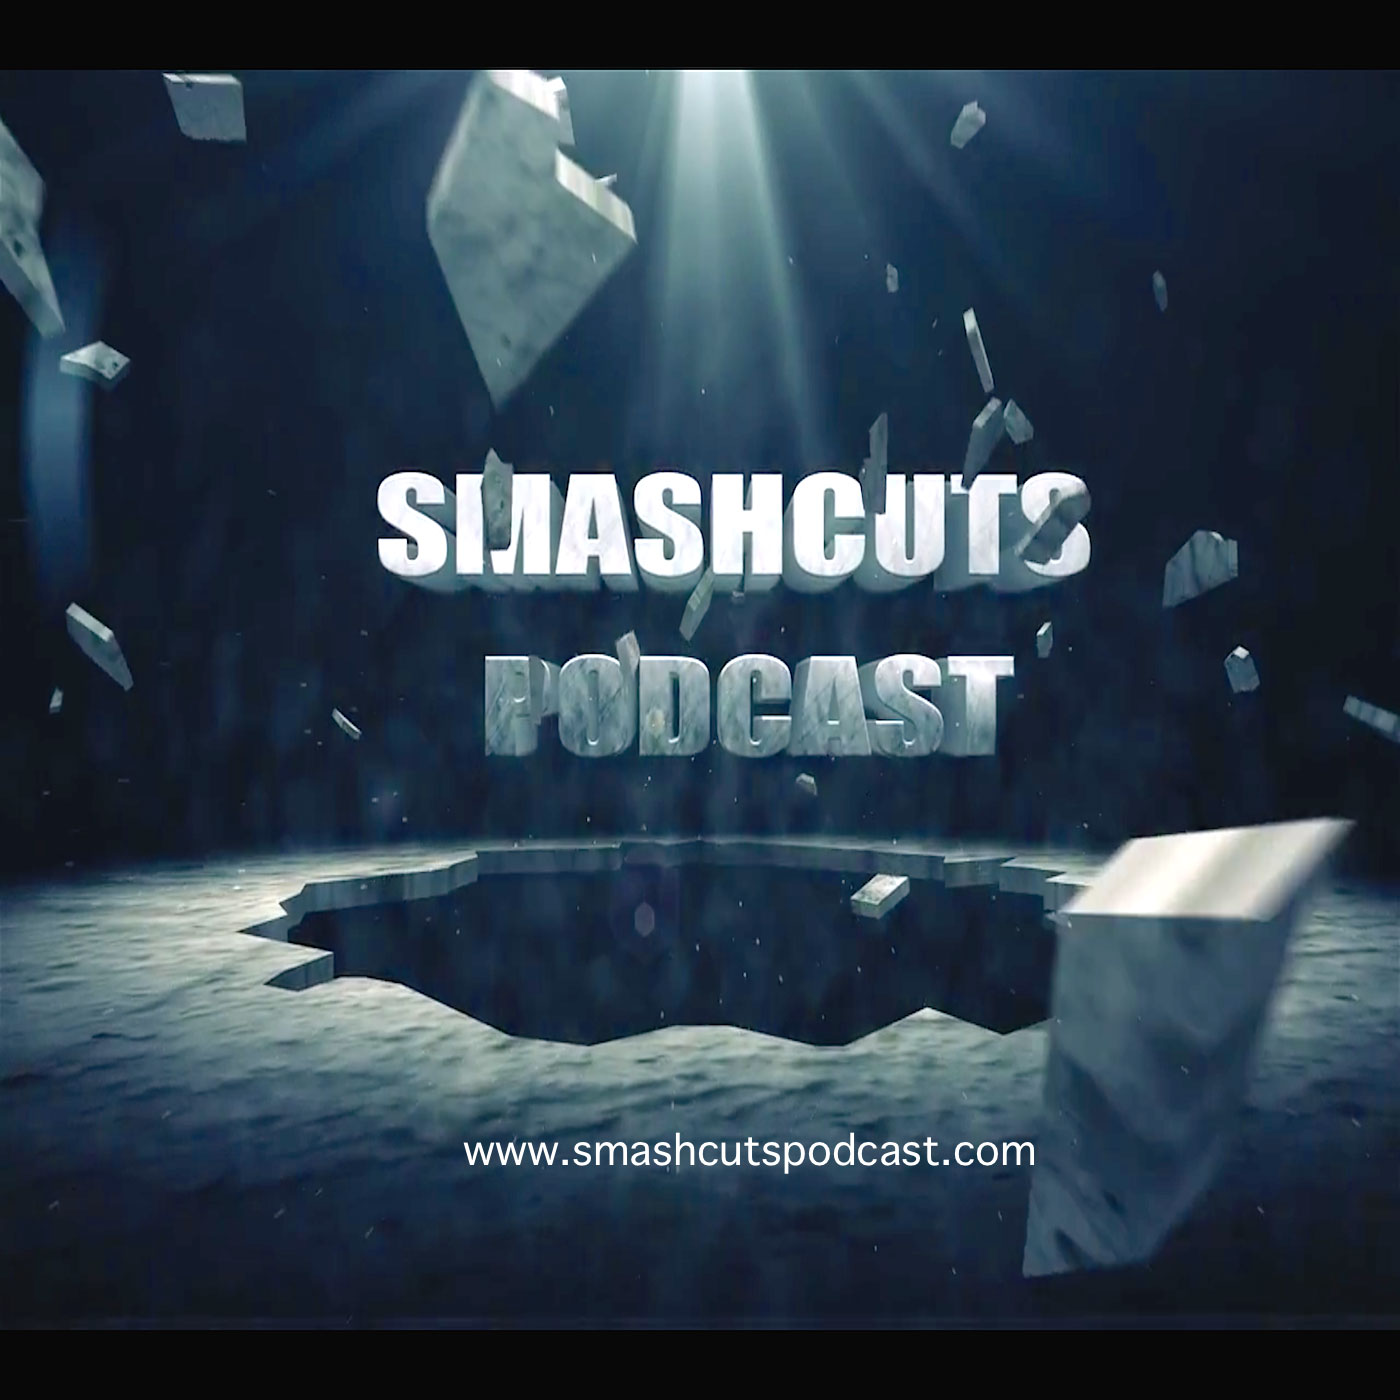 Smashcuts Podcast - Quiet before  AVENGERS